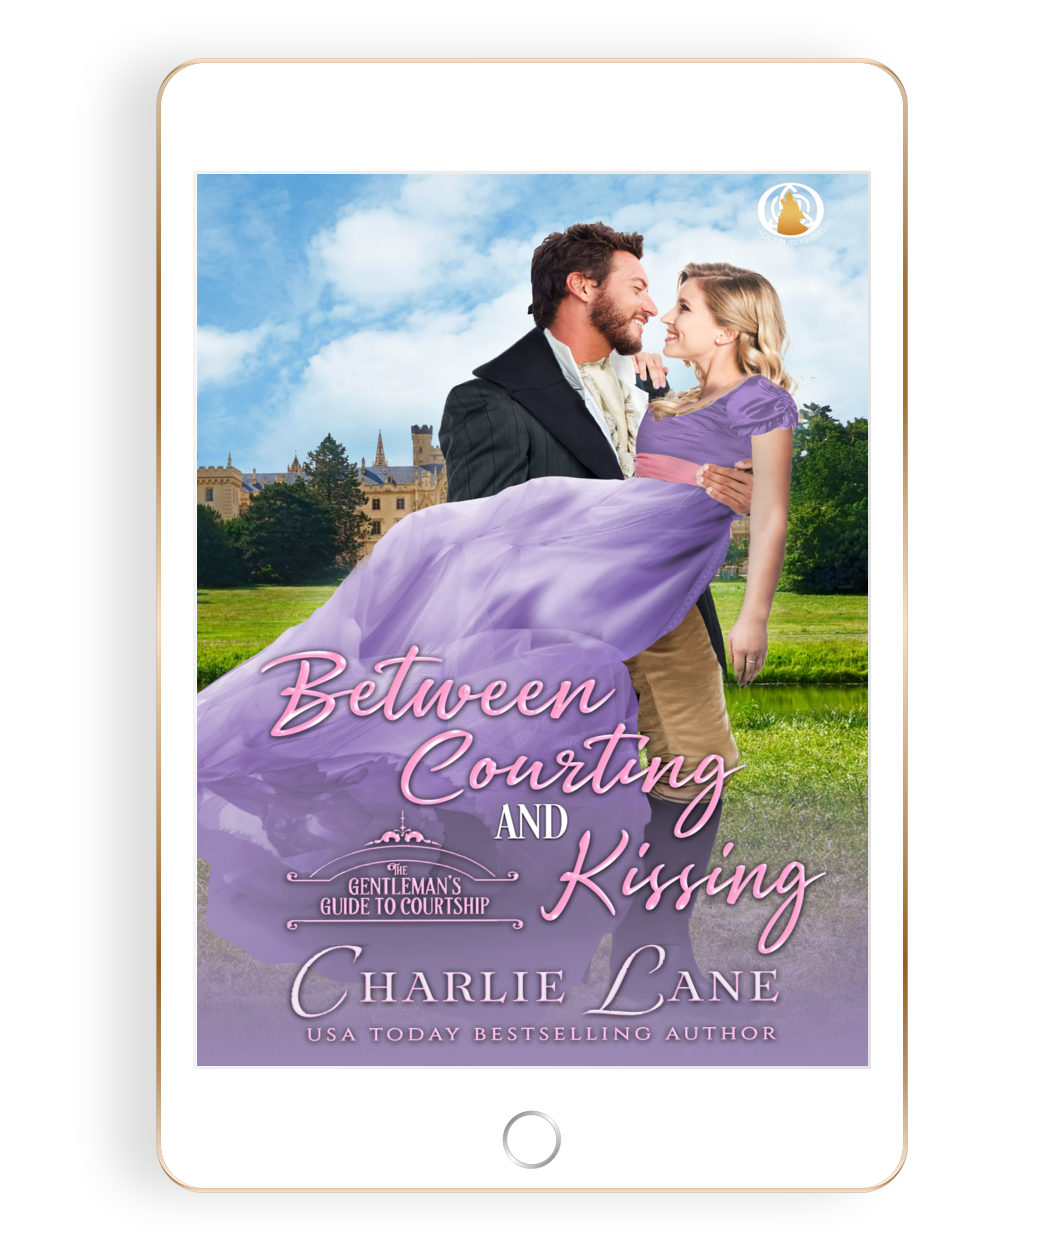 Between Courting and Kissing (Book 3)